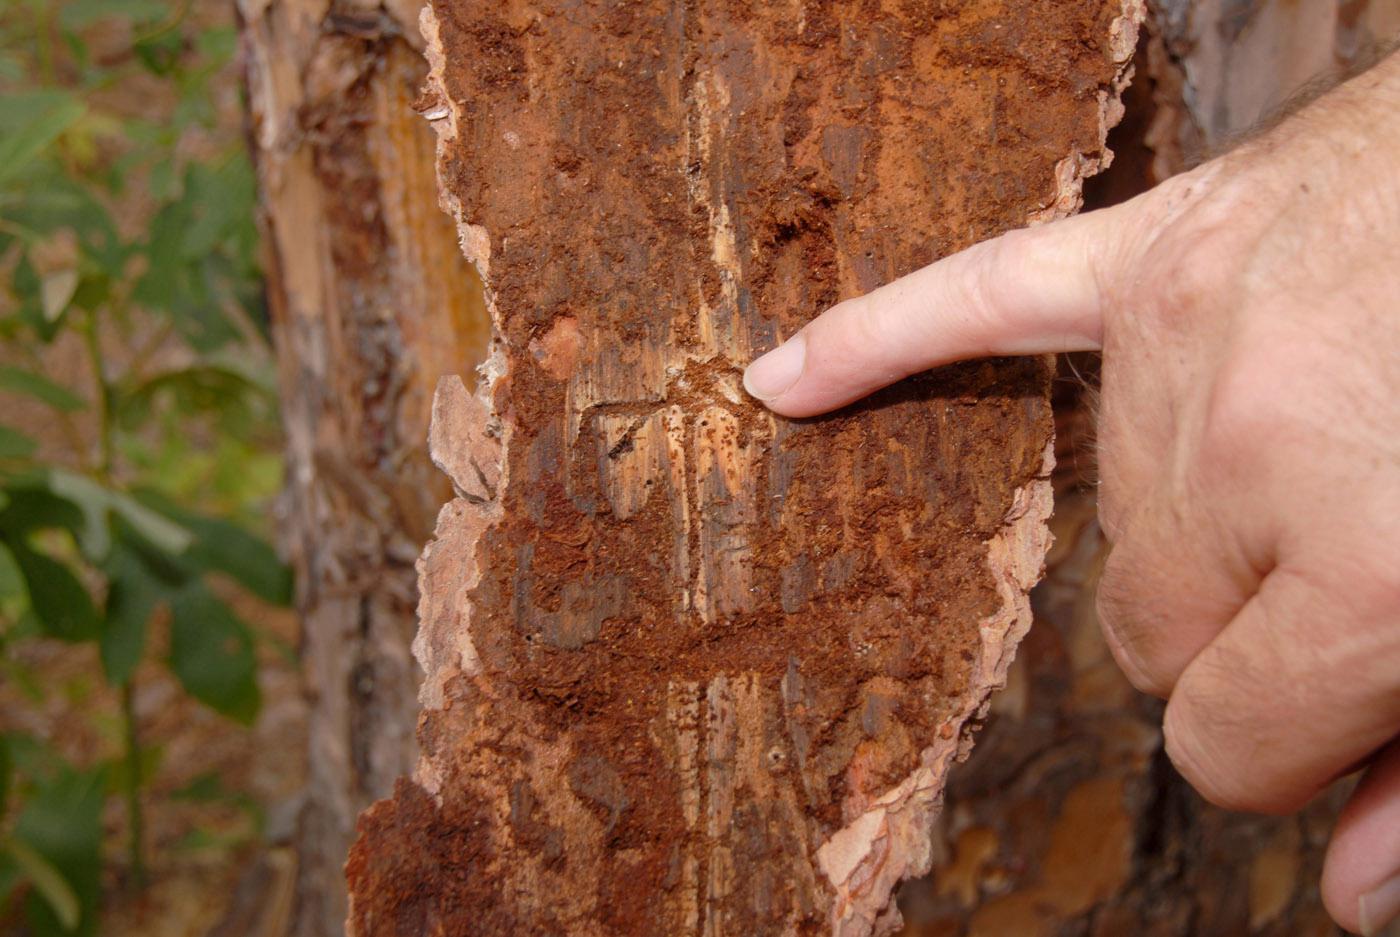 Pine bark beetles have attacked this stressed pine tree, burrowing under the bark and killing the tree. (file photo)